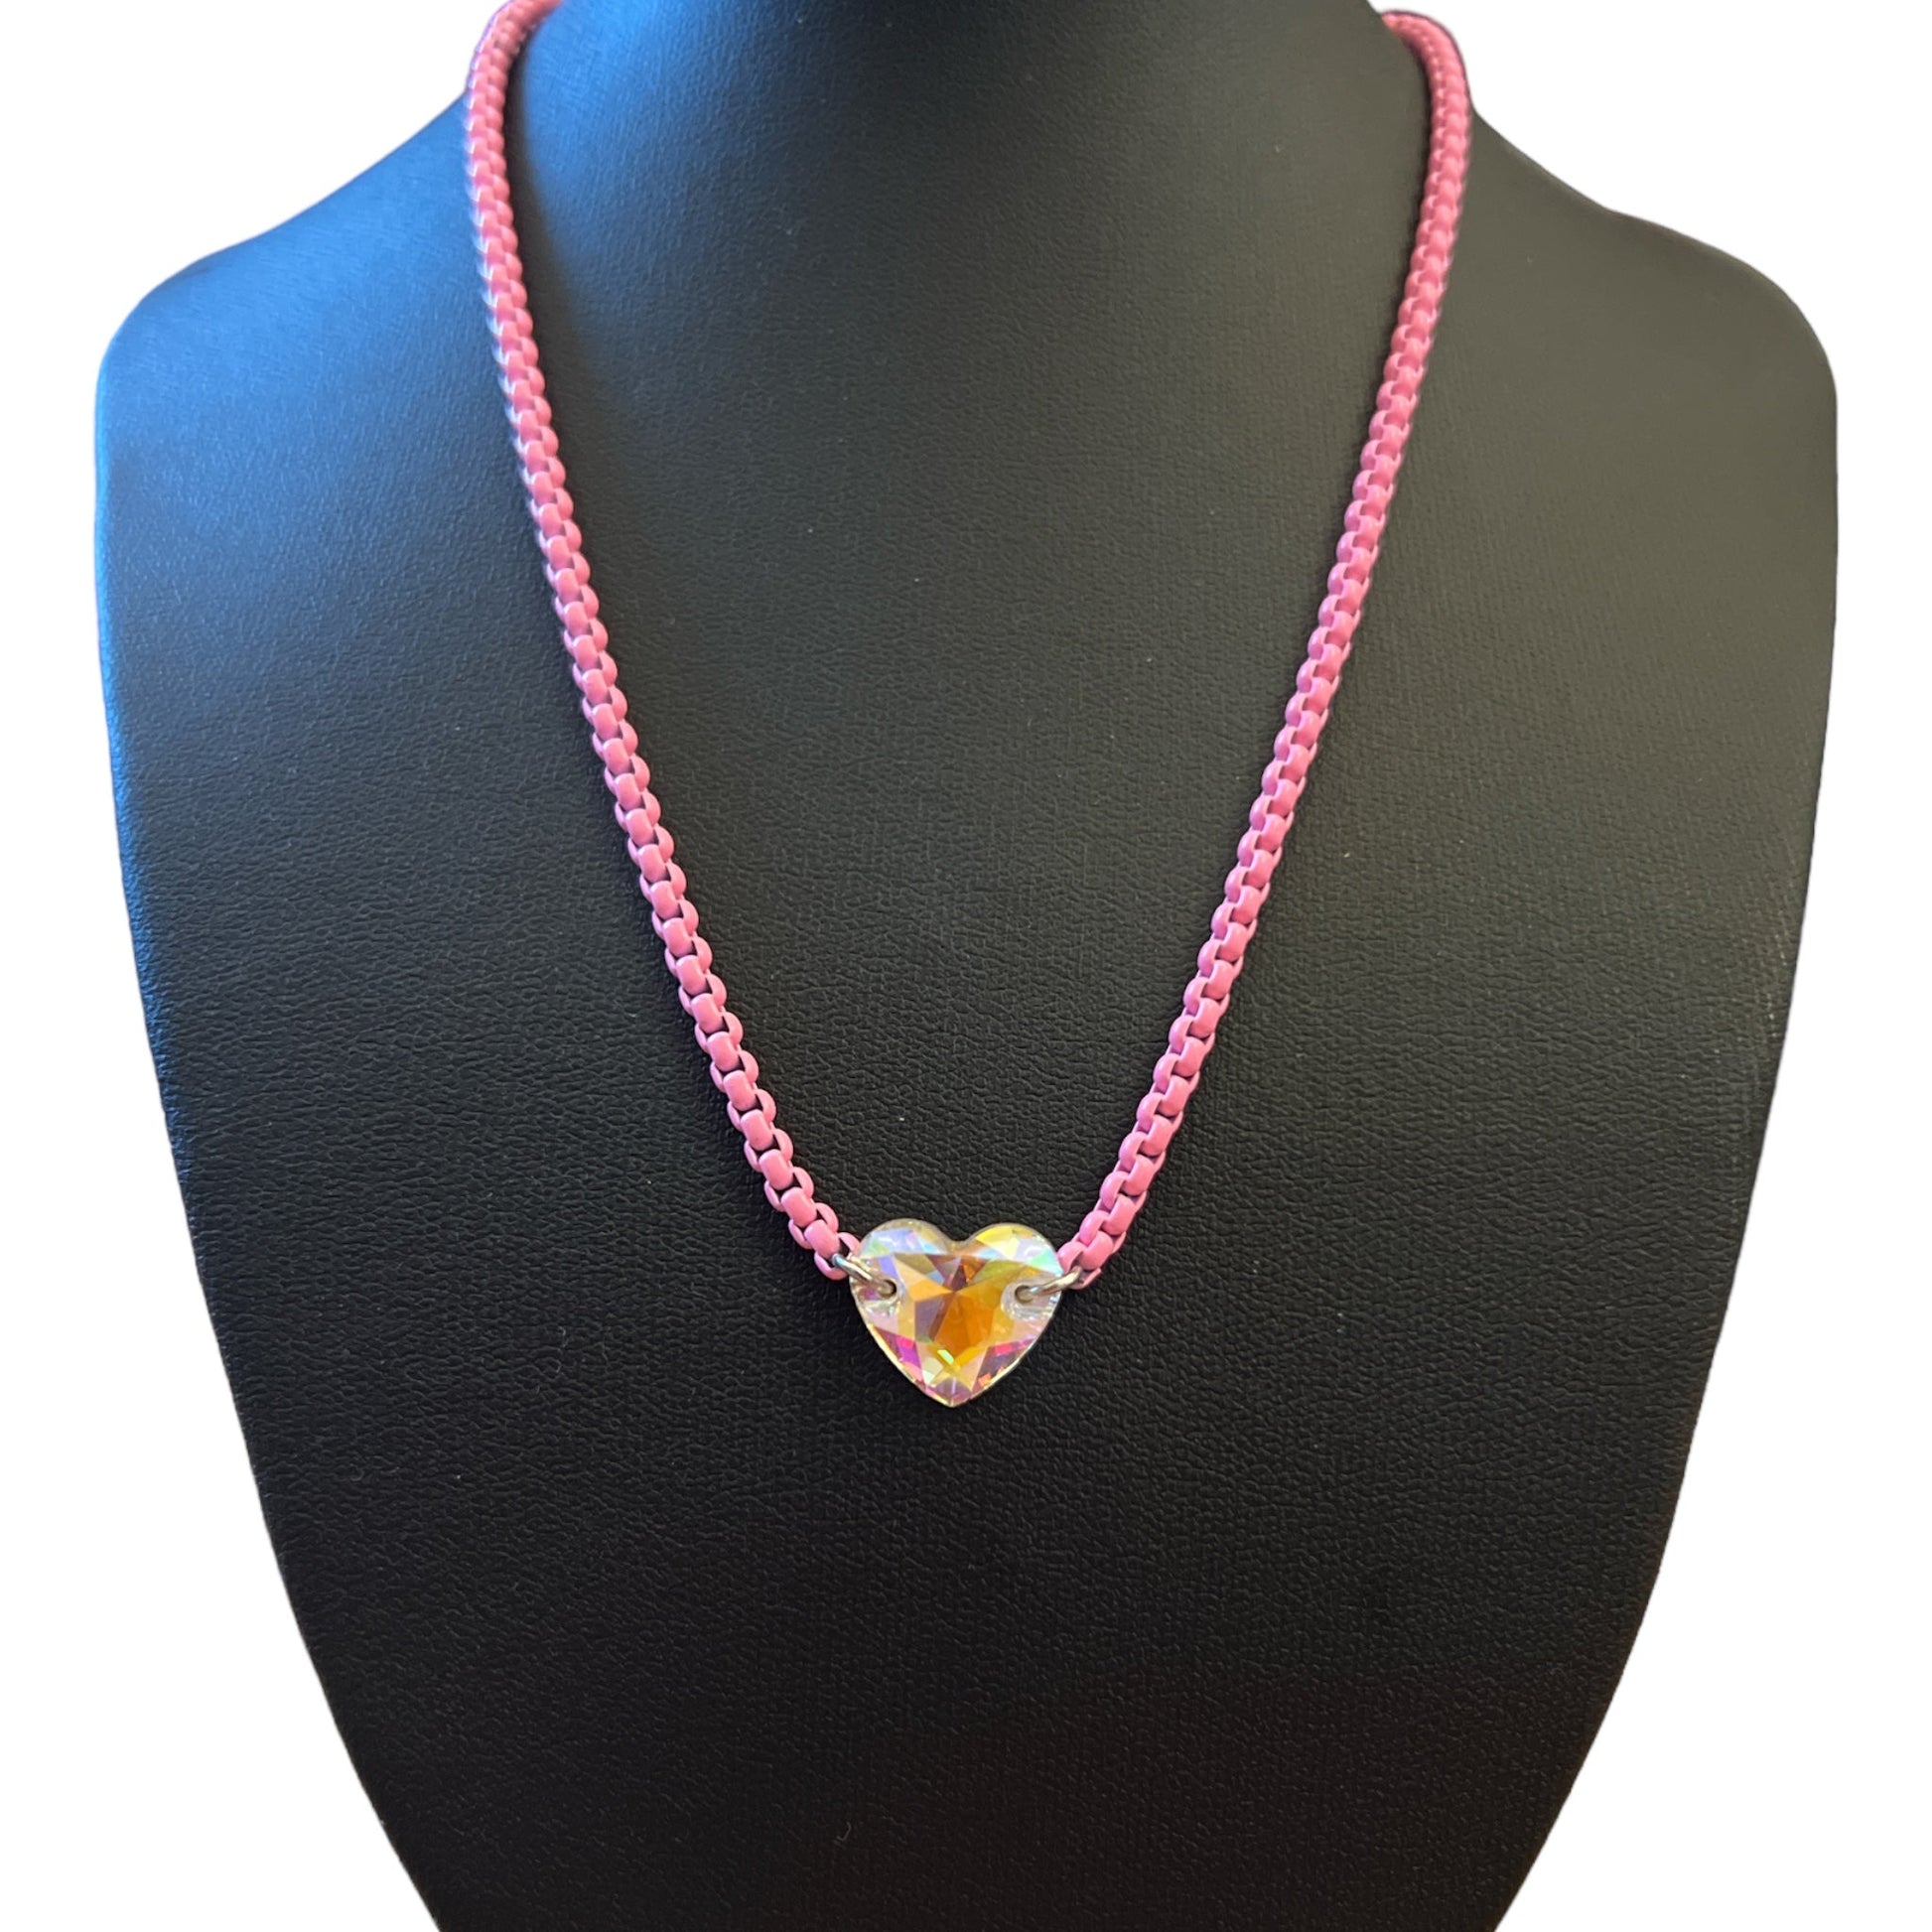 Heart Gem Necklace - Something about Sofia